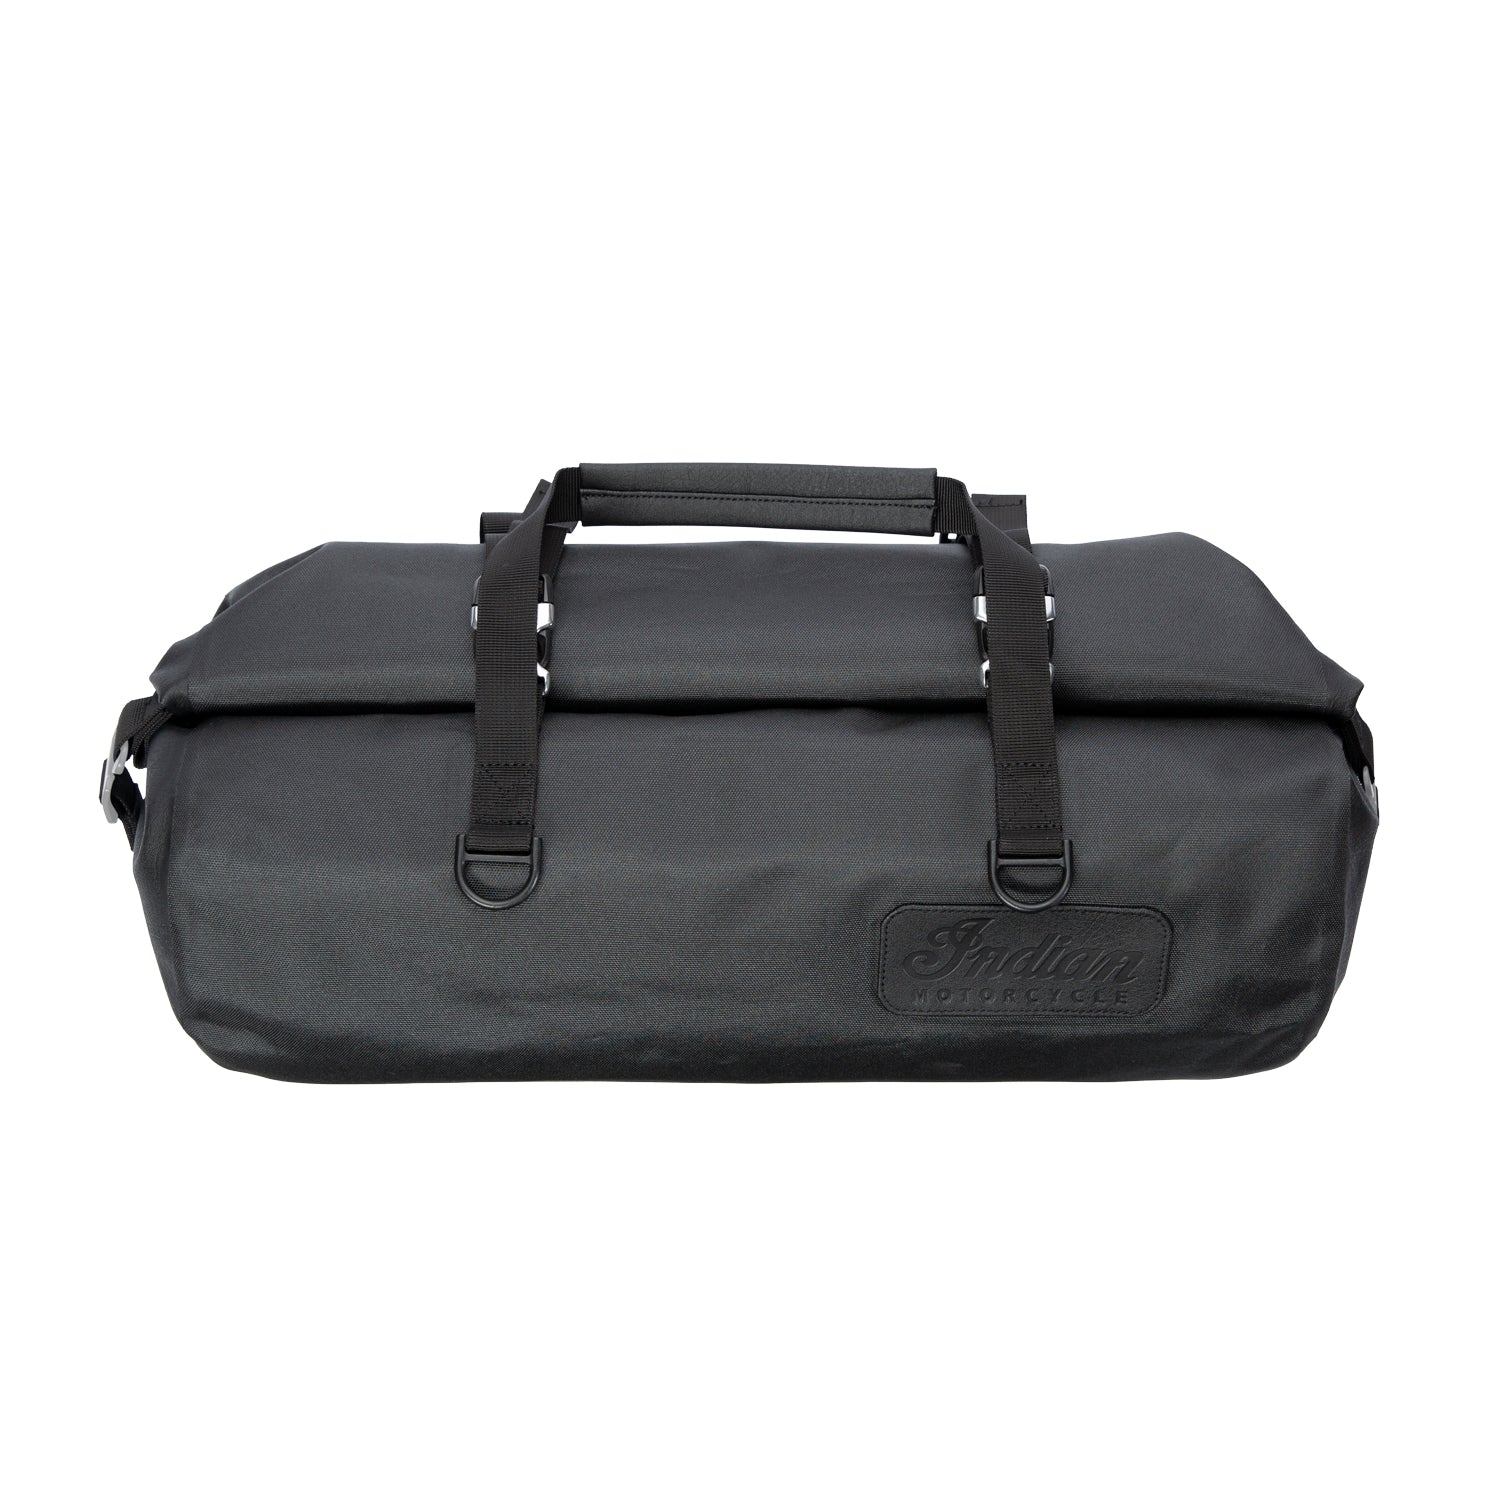 All-Weather Vinyl Duffle Bag with Shoulder Strap, Gray/Black